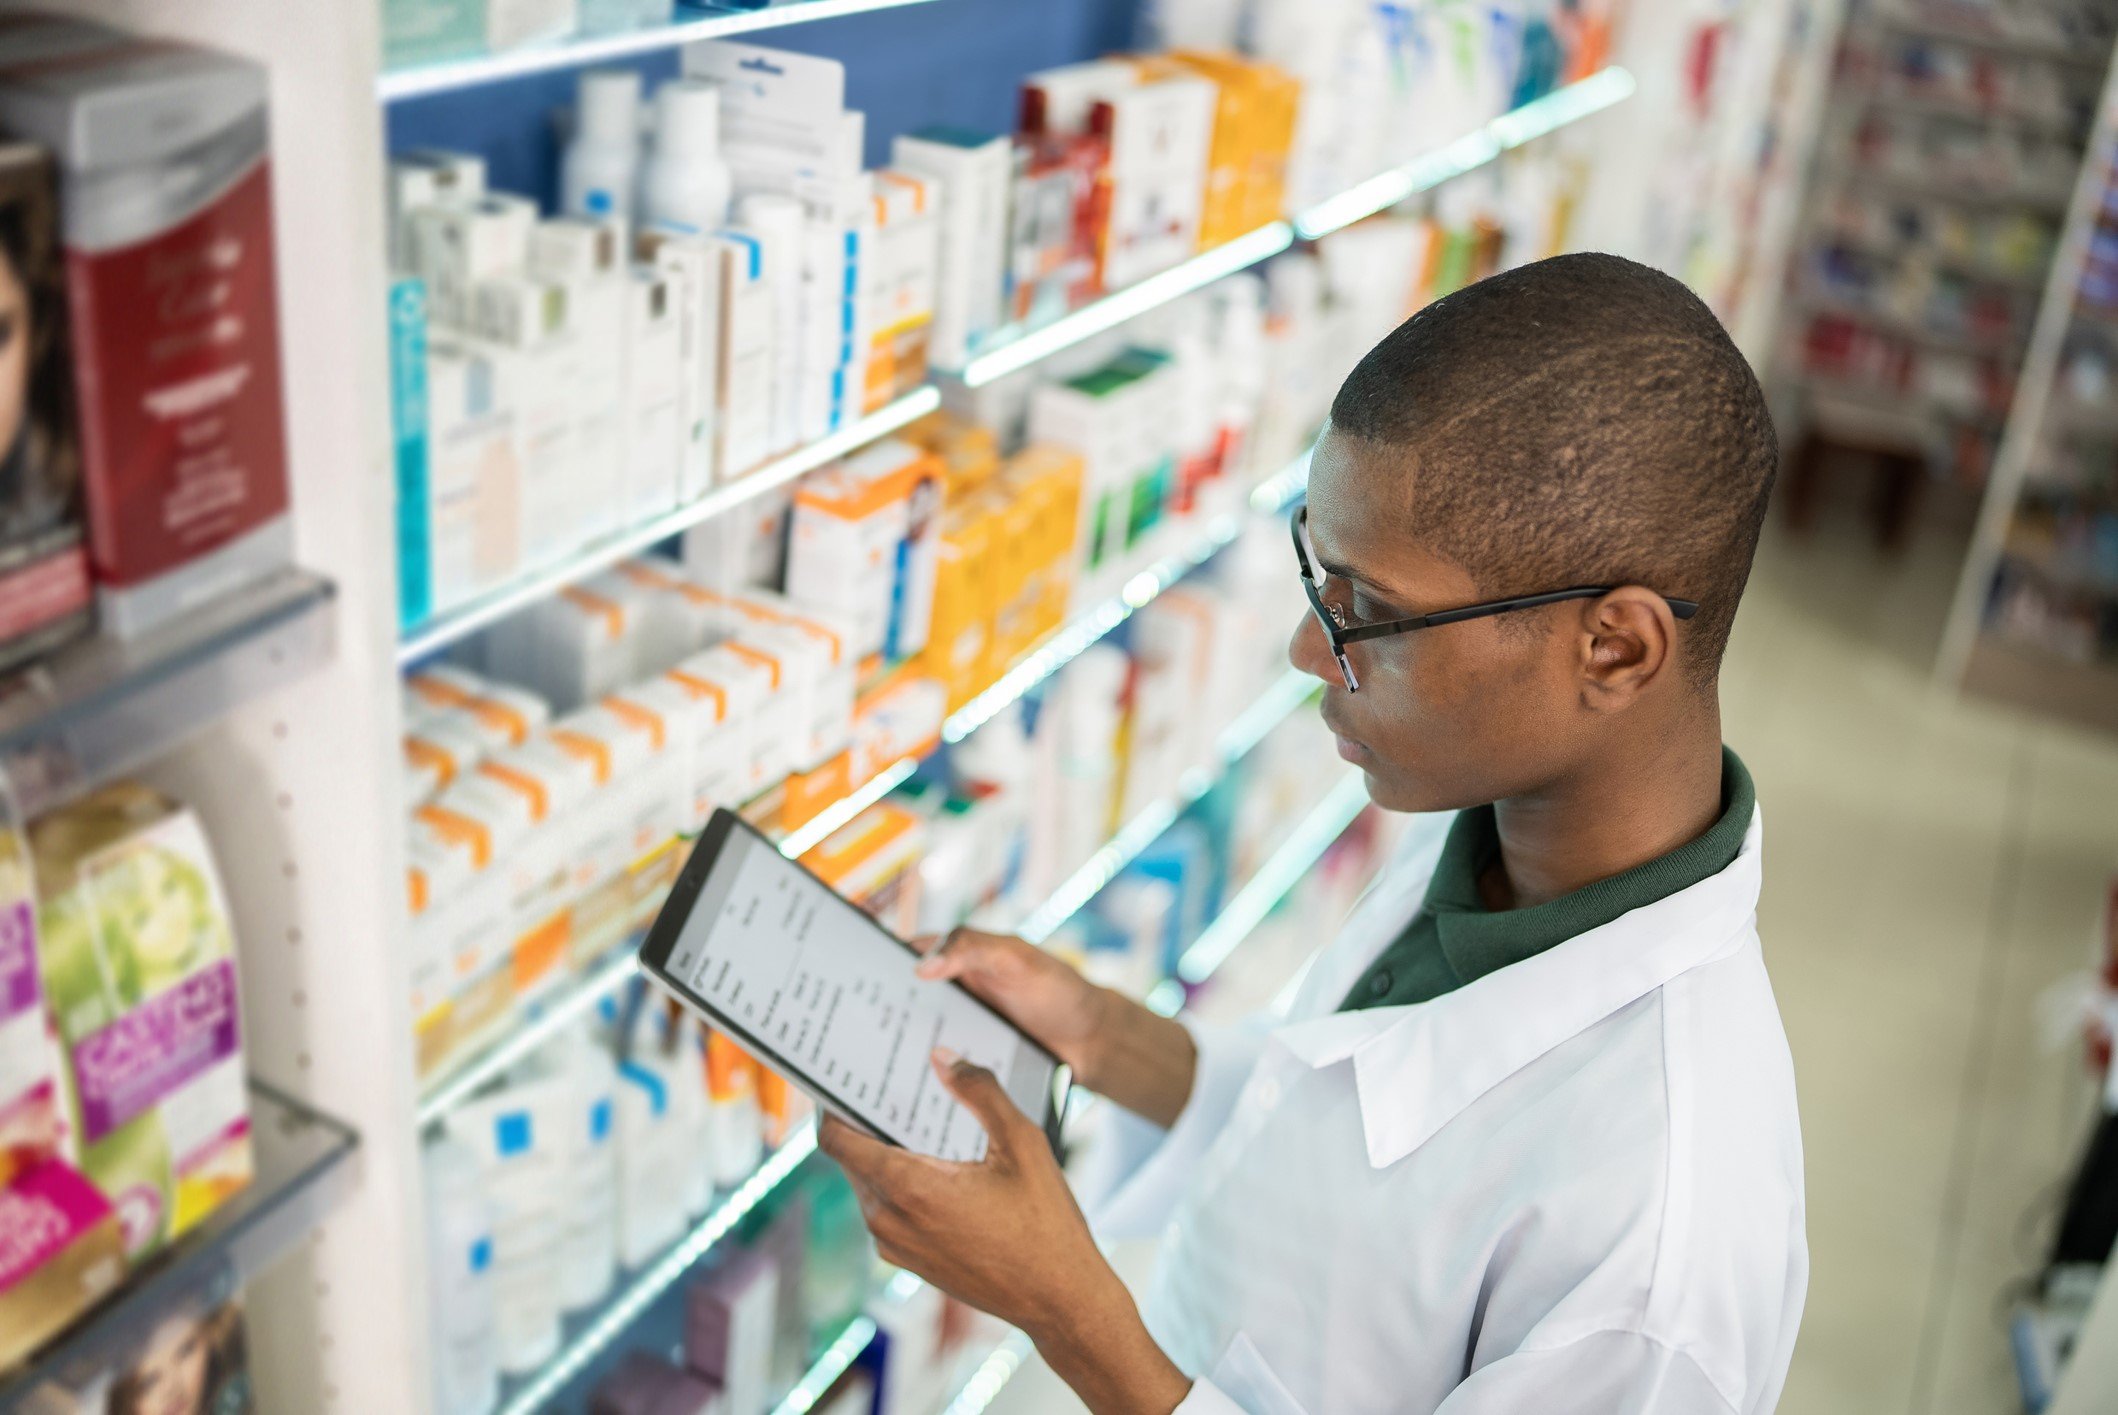 Young pharmacist checking the shelves with a digital tablet at the pharmacy - stock photo FG TradeGetty Images